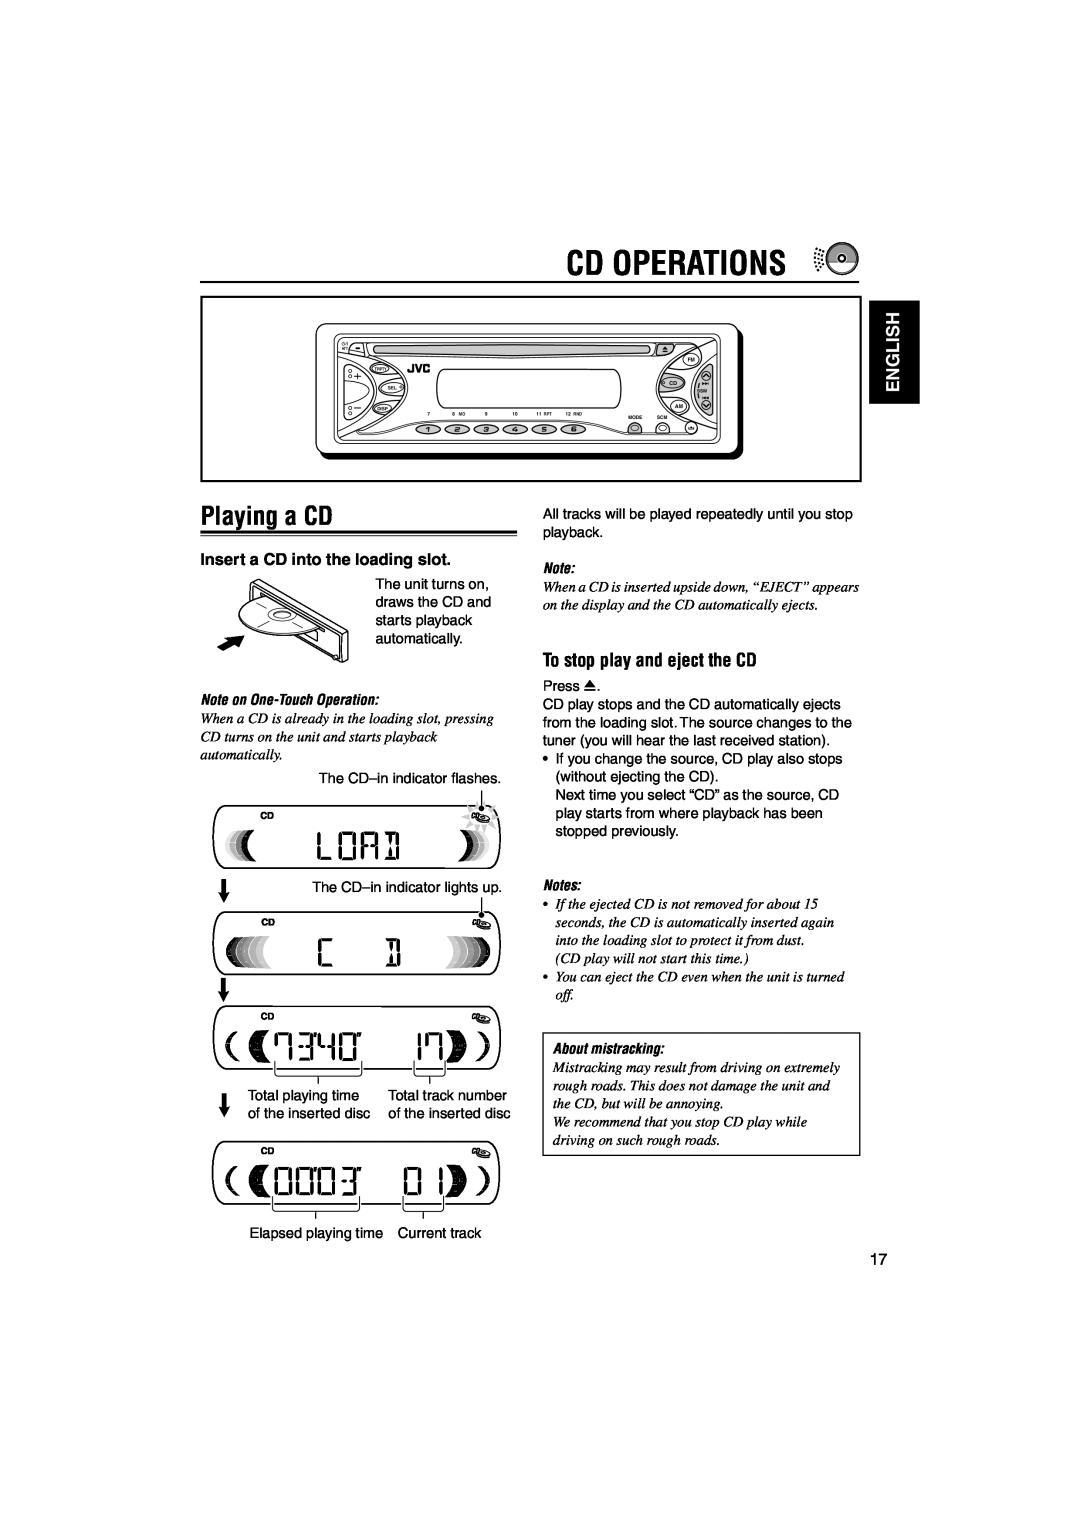 JVC KD-S71R manual Cd Operations, Playing a CD, To stop play and eject the CD, English, Insert a CD into the loading slot 